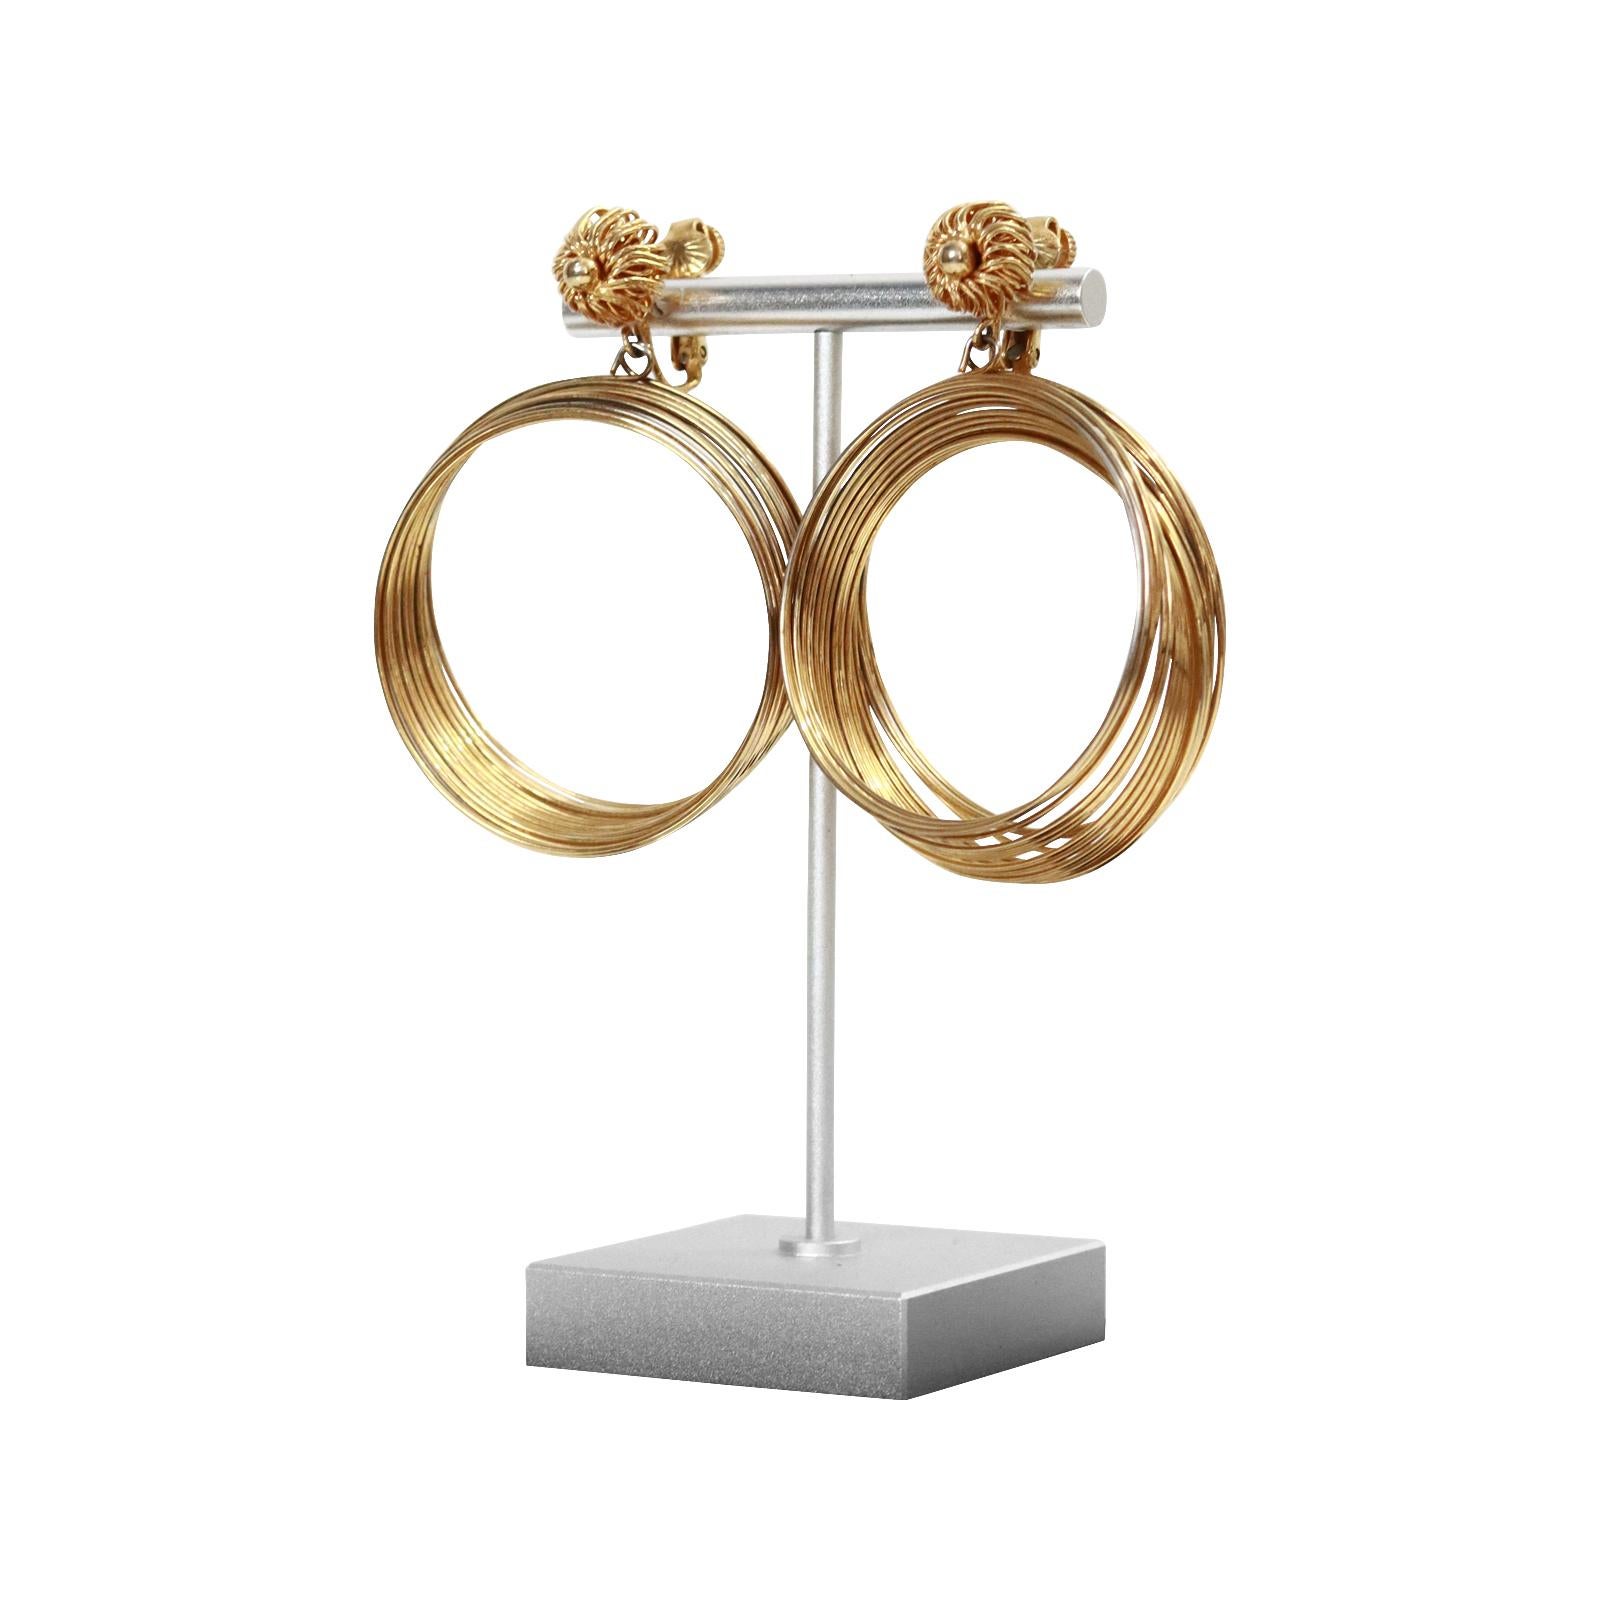 Vintage Vendome Large Slinky Dangling Hoop Earrings, circa 1980s In Good Condition For Sale In New York, NY